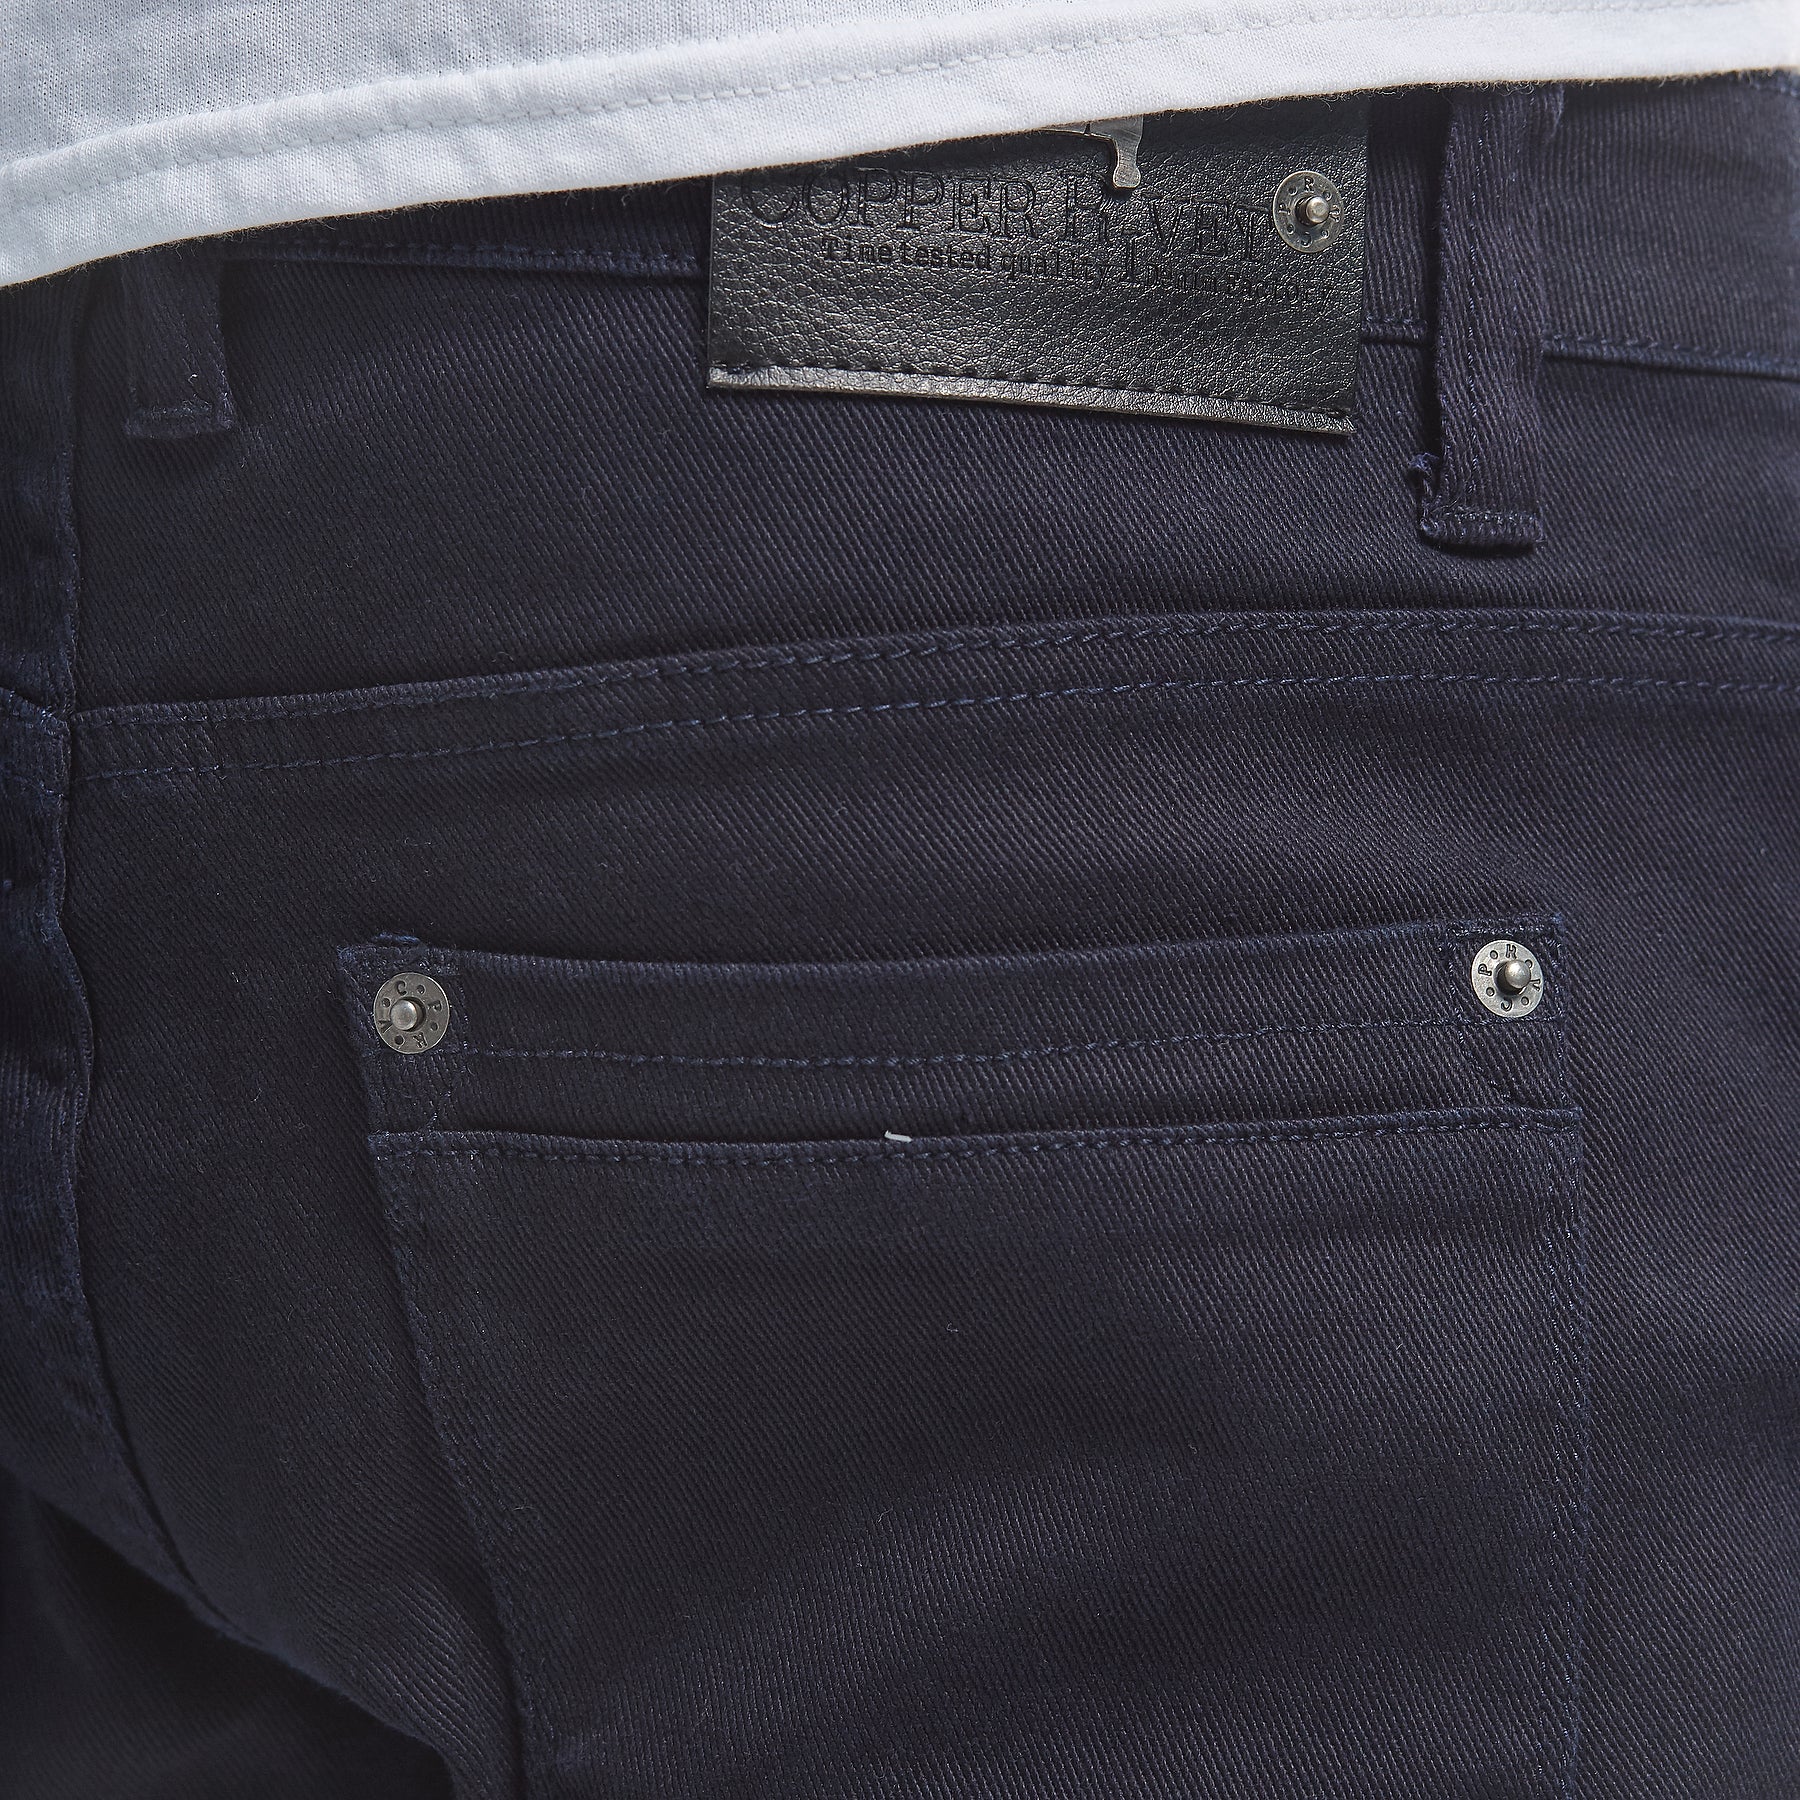 NAVY PANTS WITH RIPS - Copper Rivet